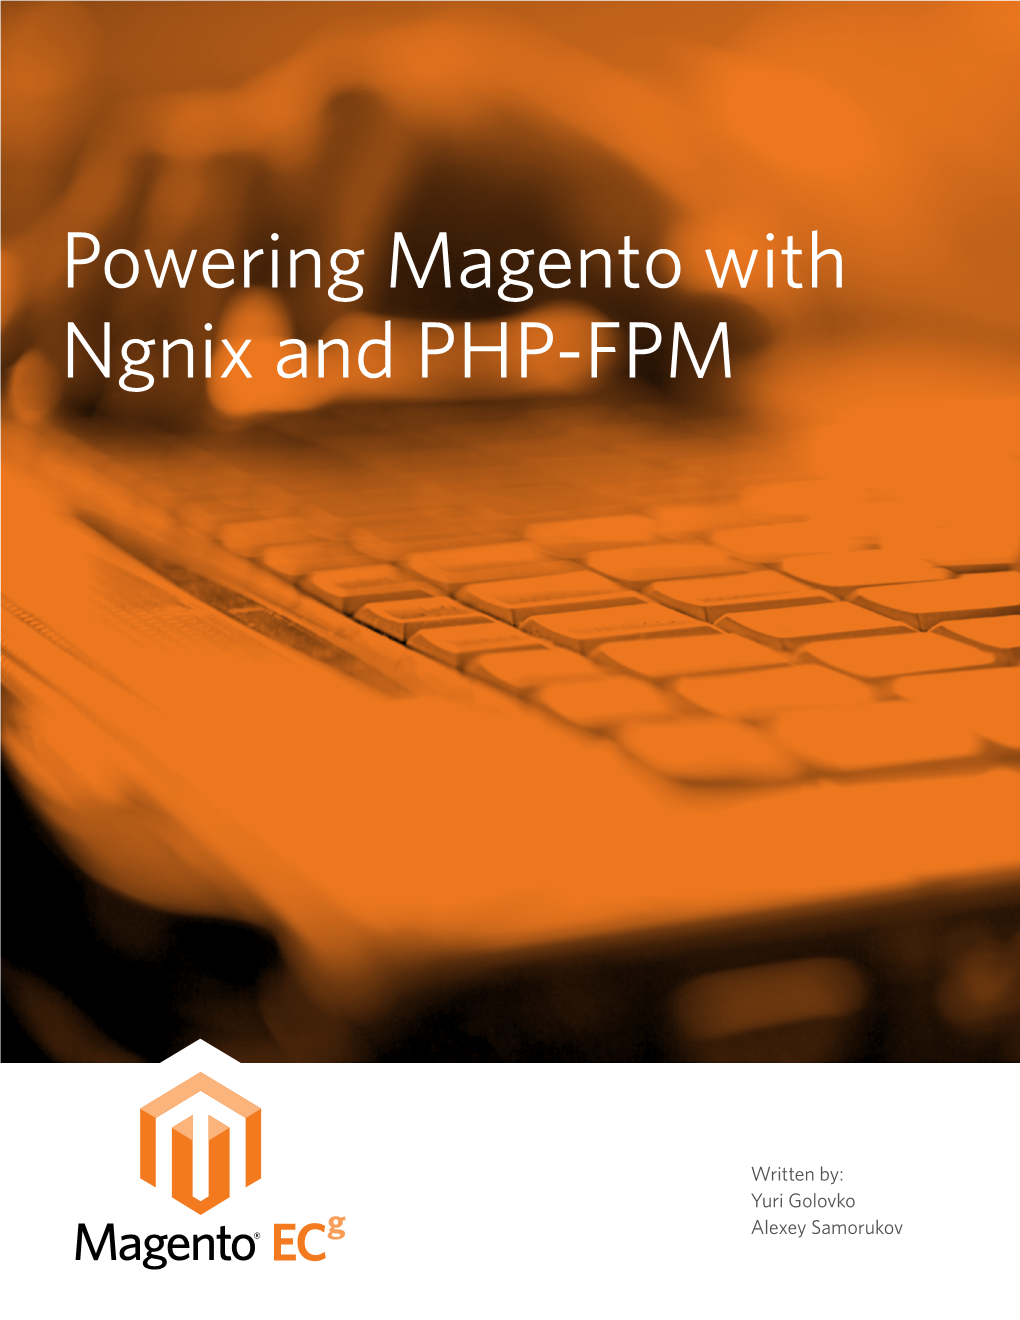 Powering Magento with Ngnix and PHP-FPM